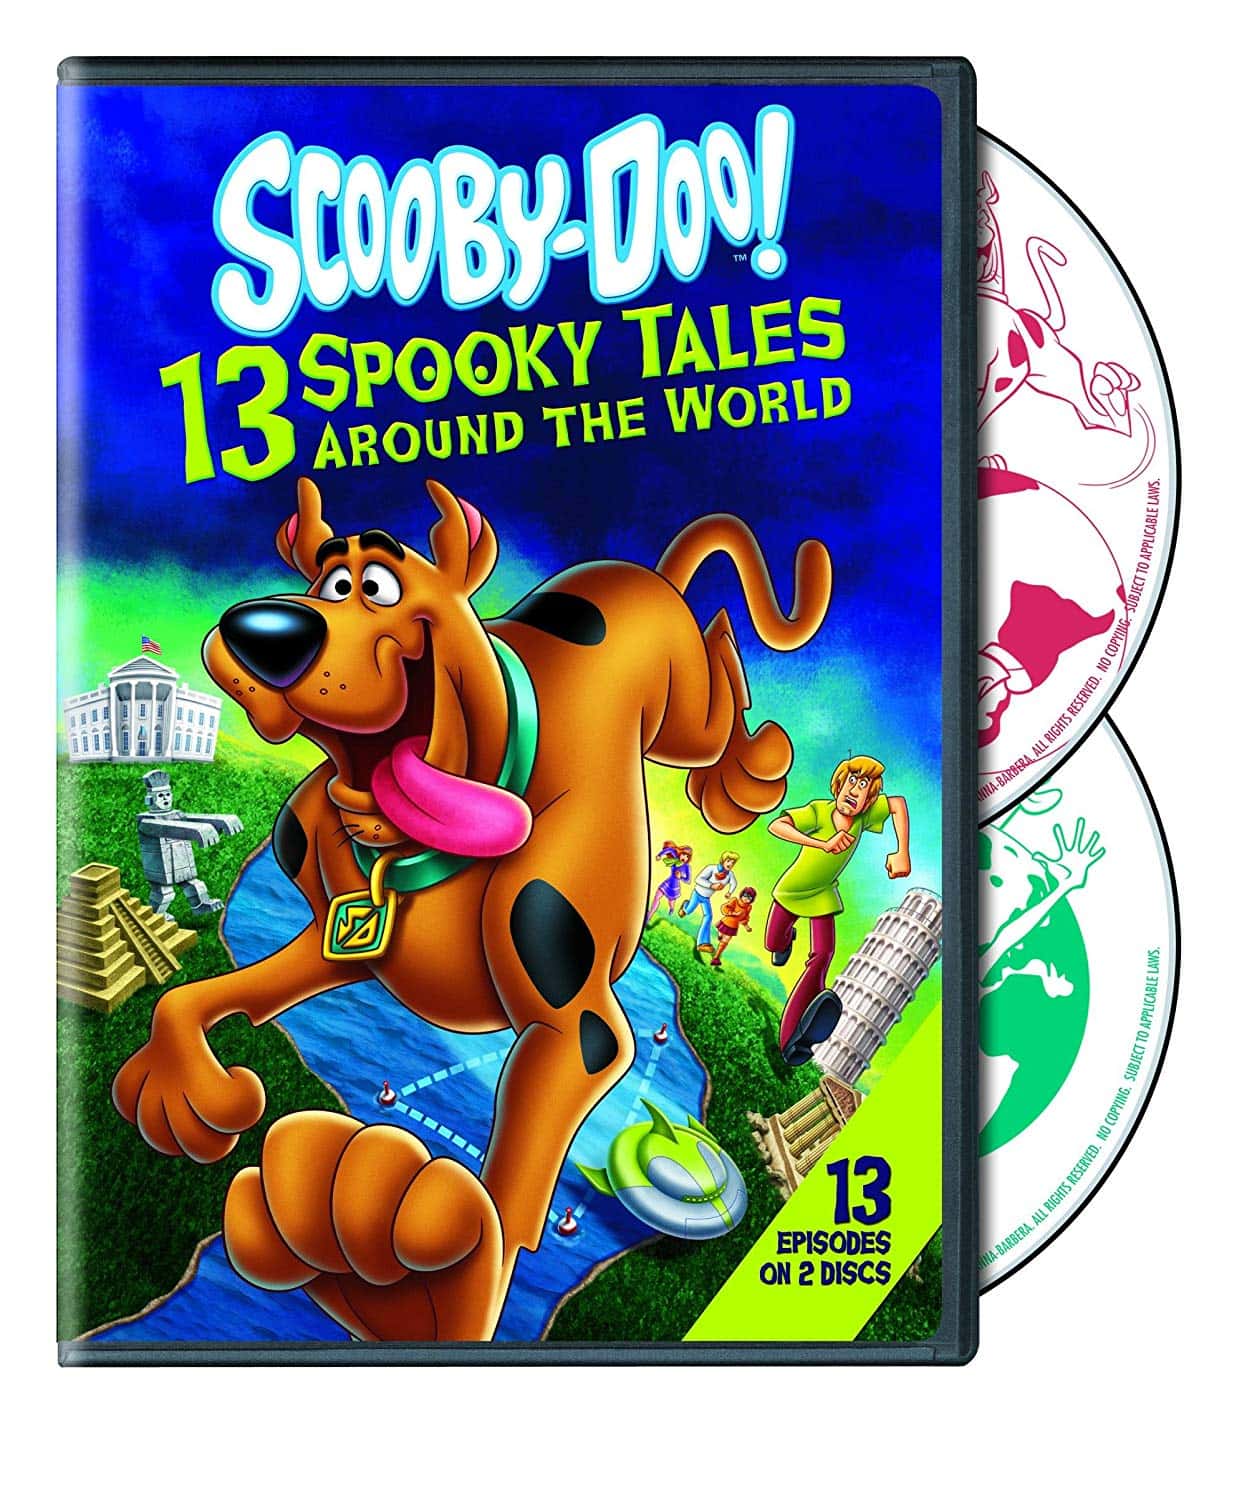 Scooby-Doo 13 Spooky Tales Around the World